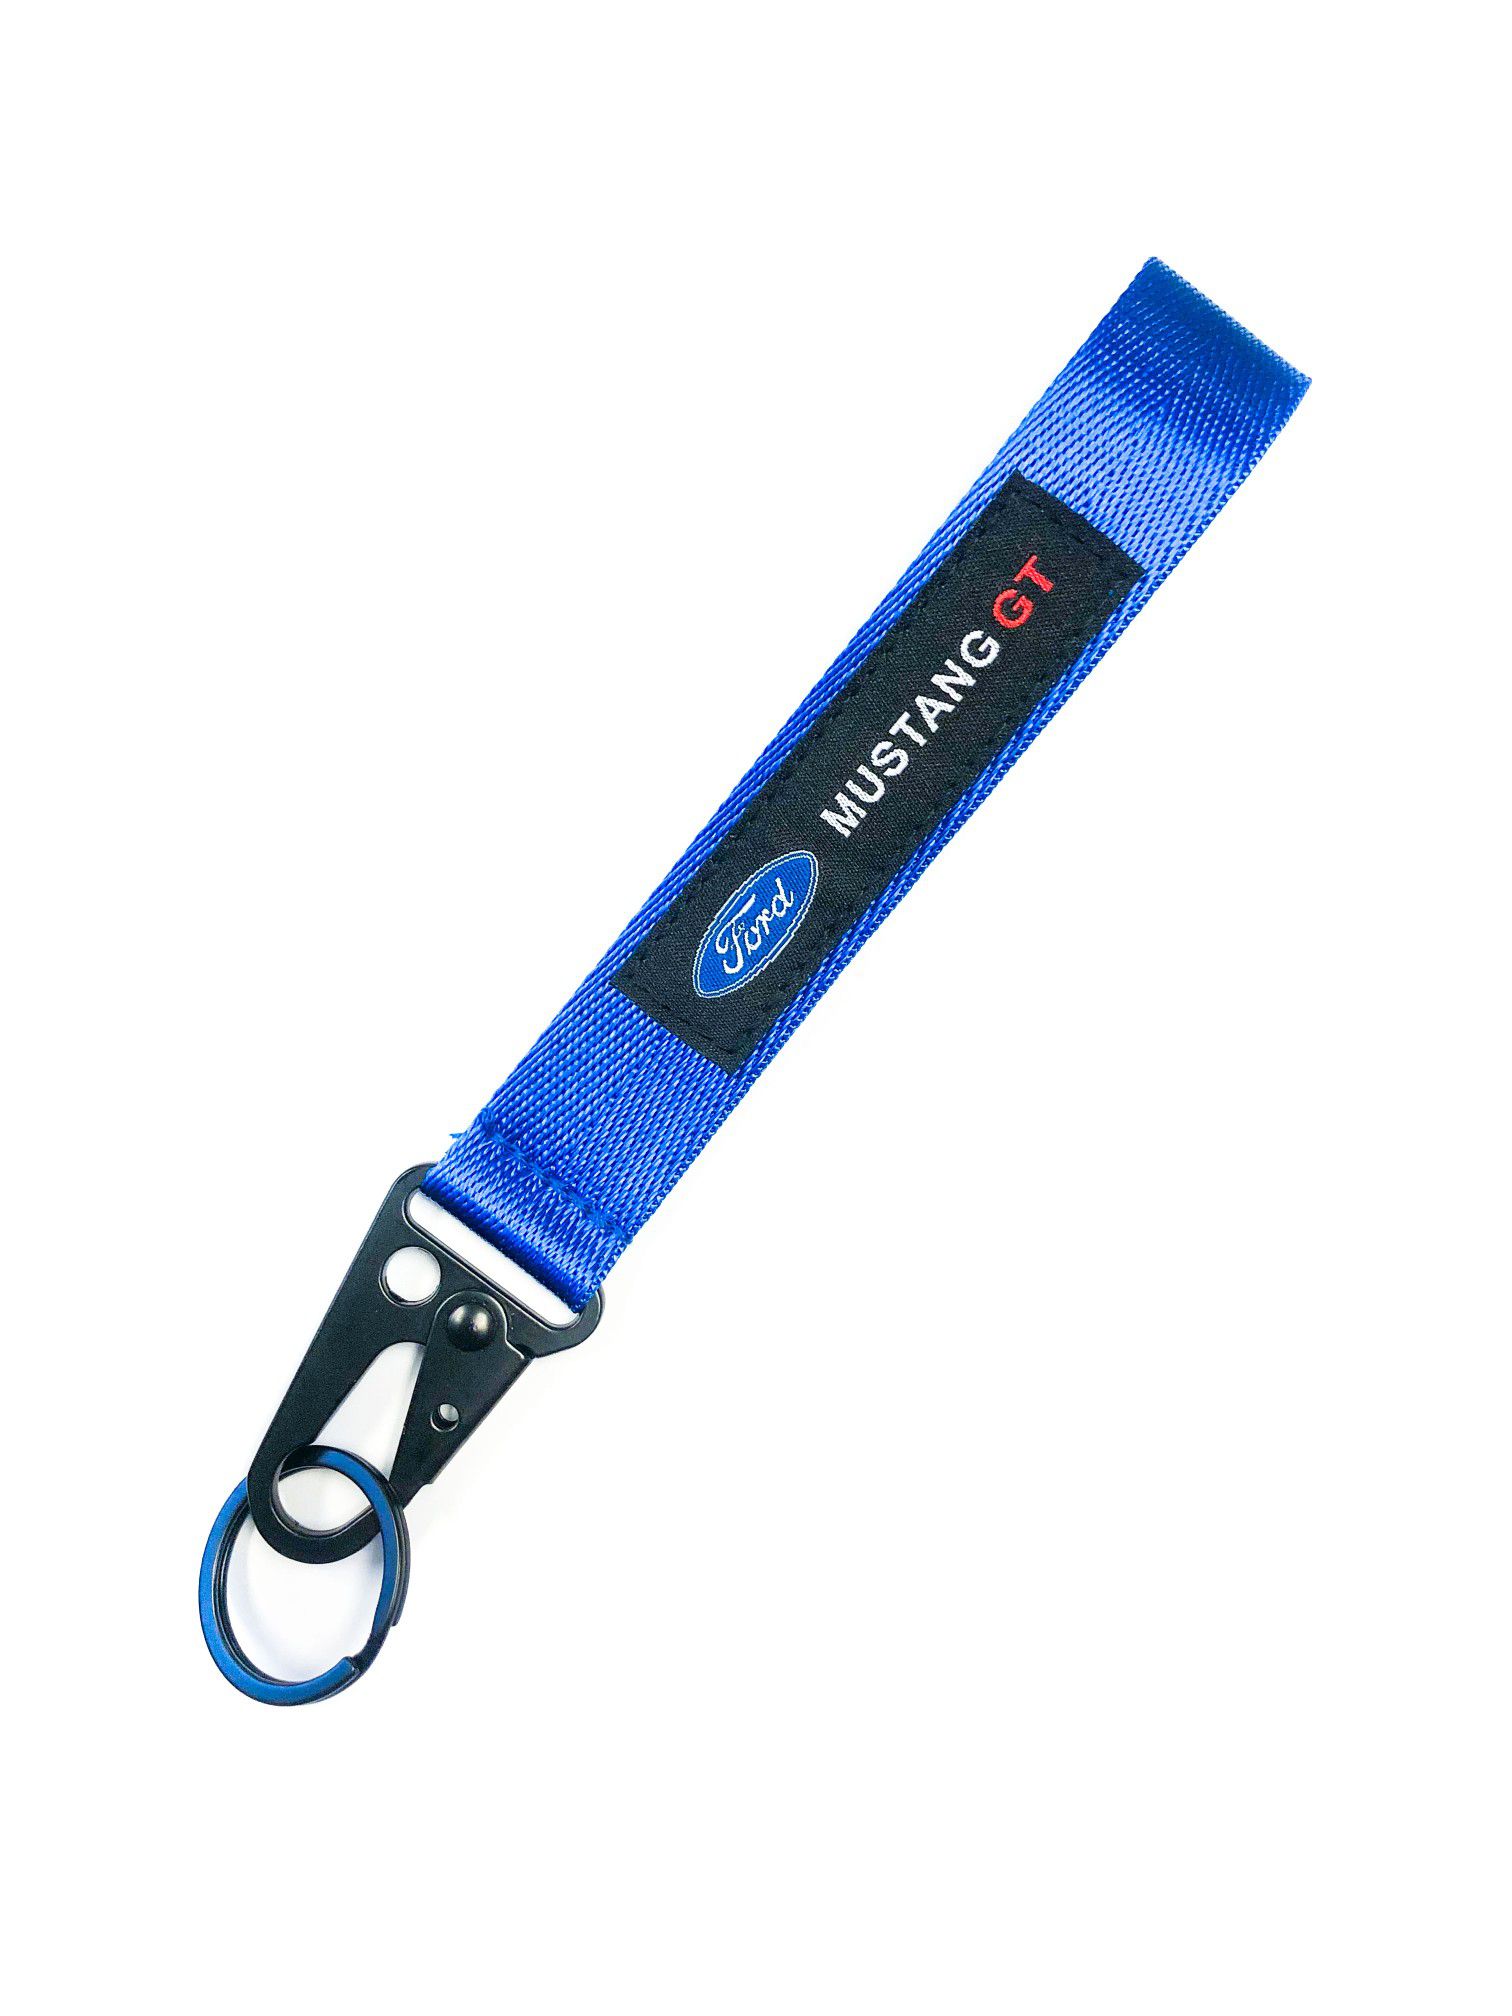 BRAND NEW FORD MUSTANG GT WRIST BLUE KEYCHAIN